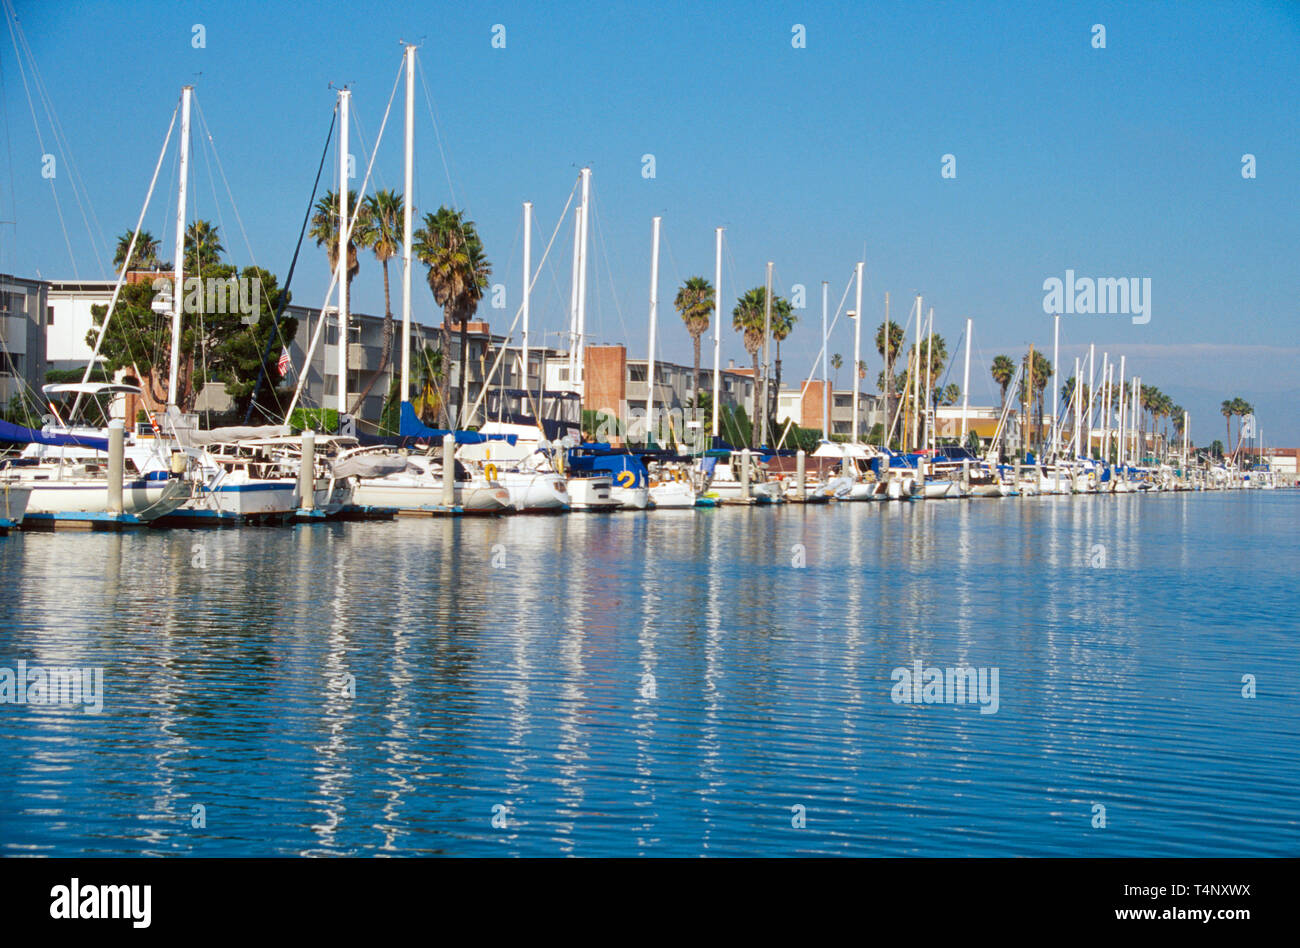 Oxnard California,Channel Islands Harbor,harbour,boats,marina,boats,boating,dock,pier,harbor,harbour,yachts,port,CA381,visitors travel traveling tour Stock Photo